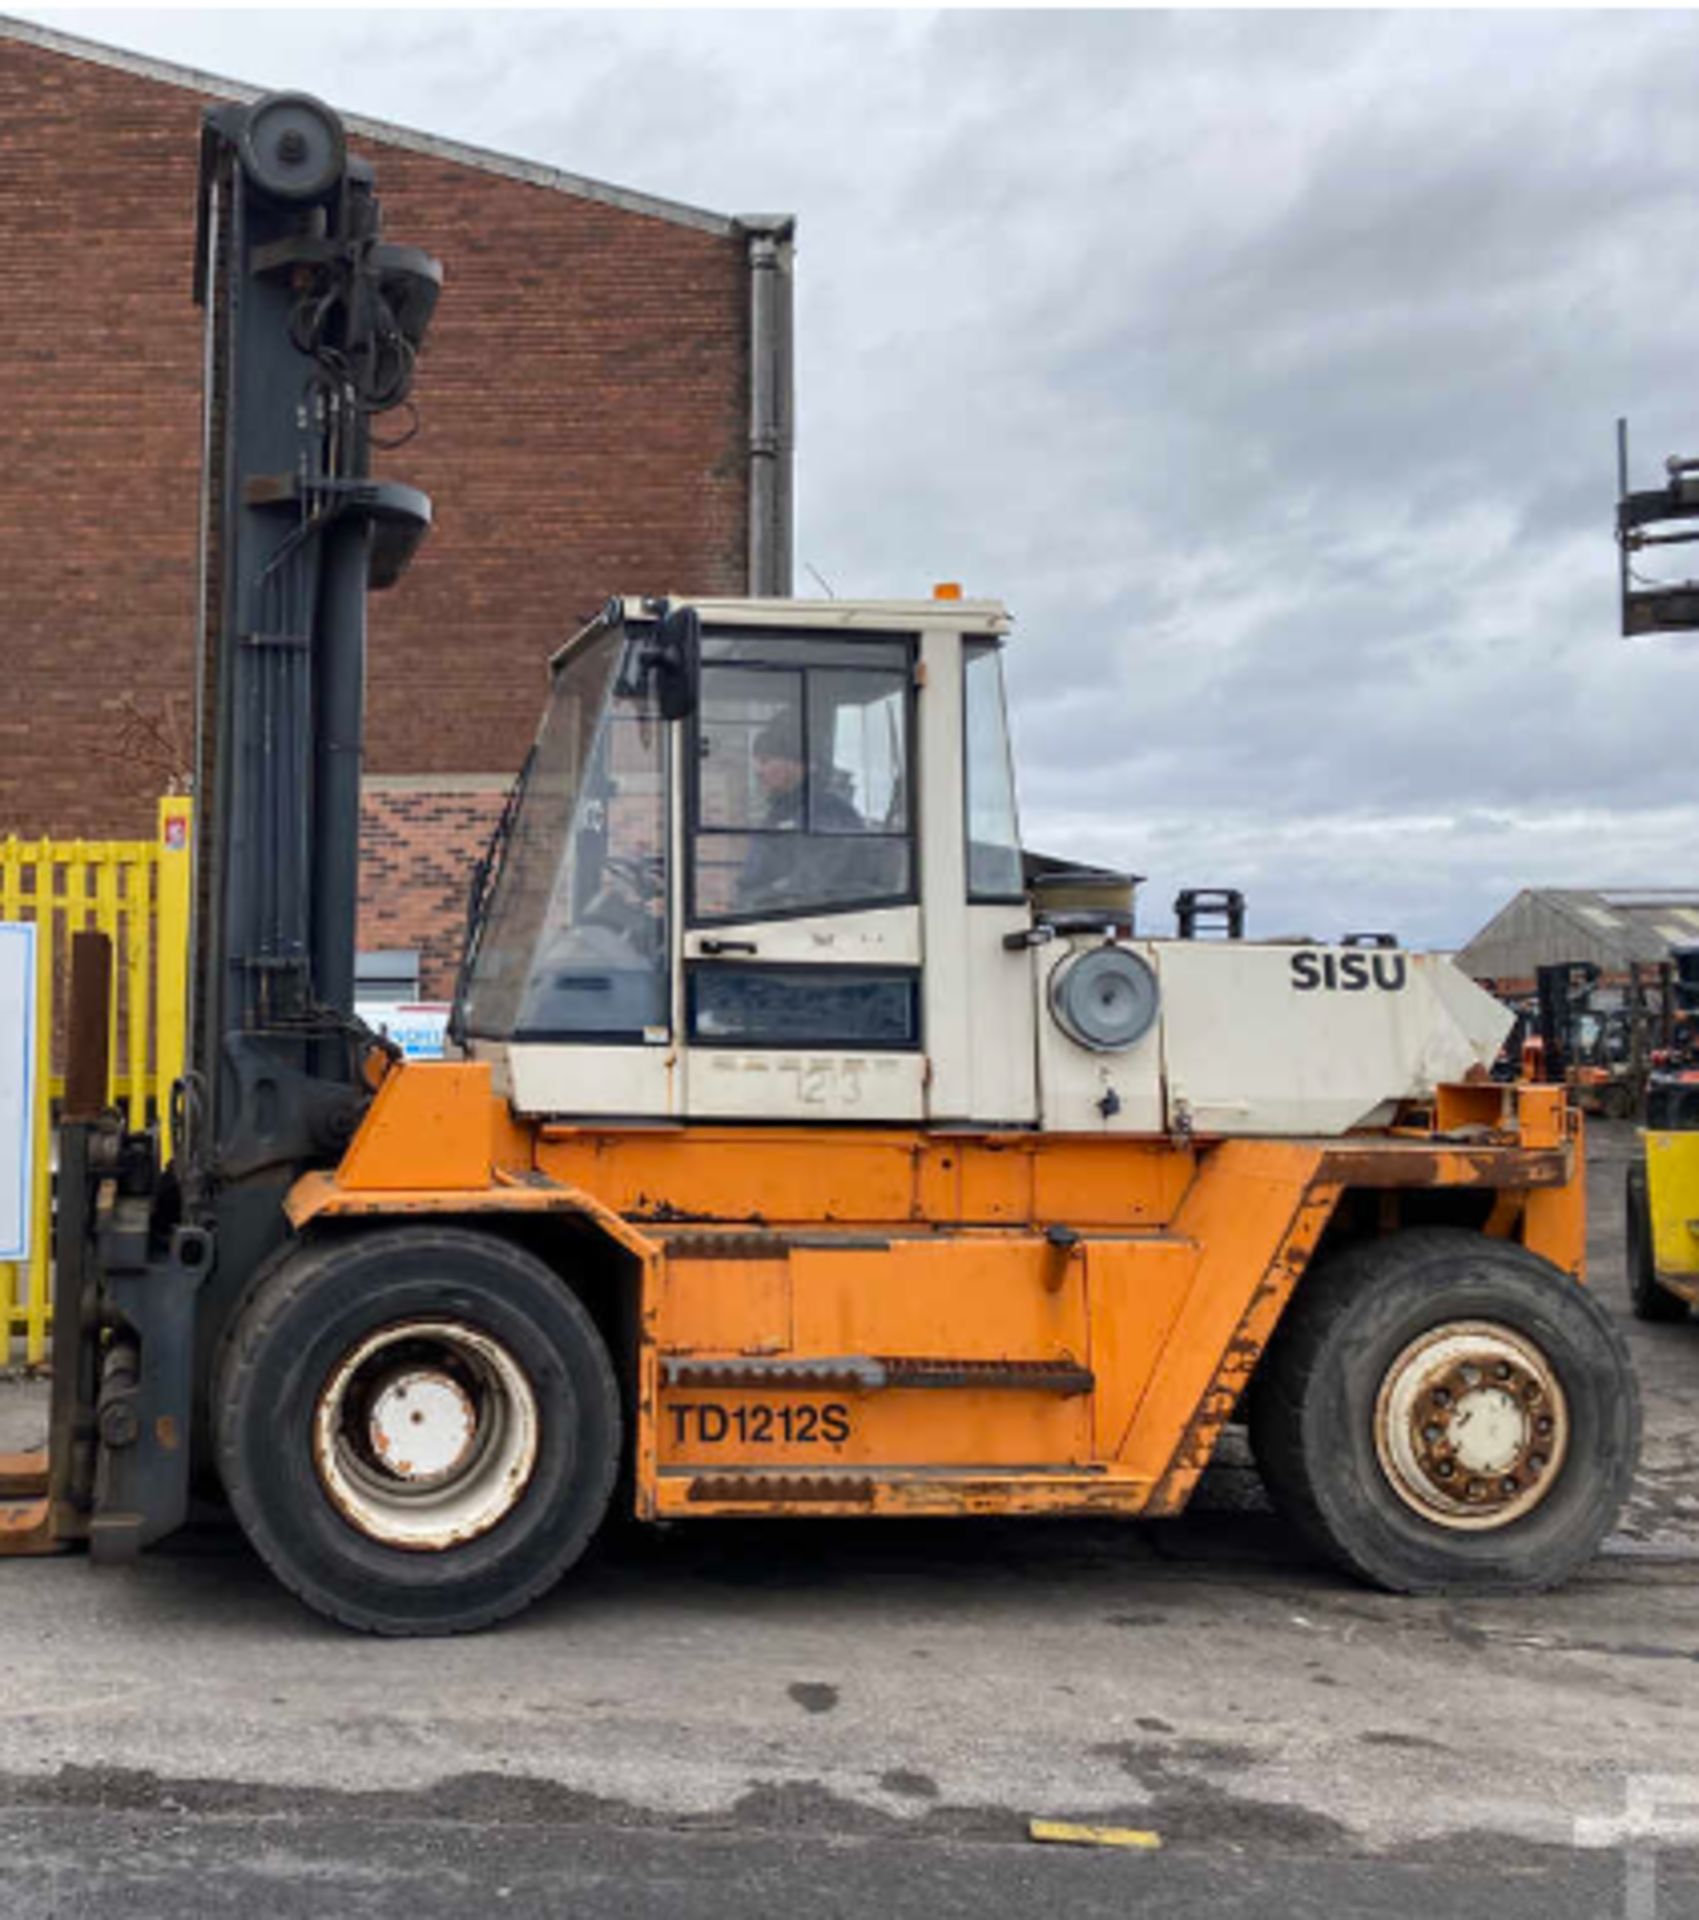 >>>SPECIAL CLEARANCE<<< 1997 DIESEL FORKLIFTS SISU TD1212S - Image 4 of 5